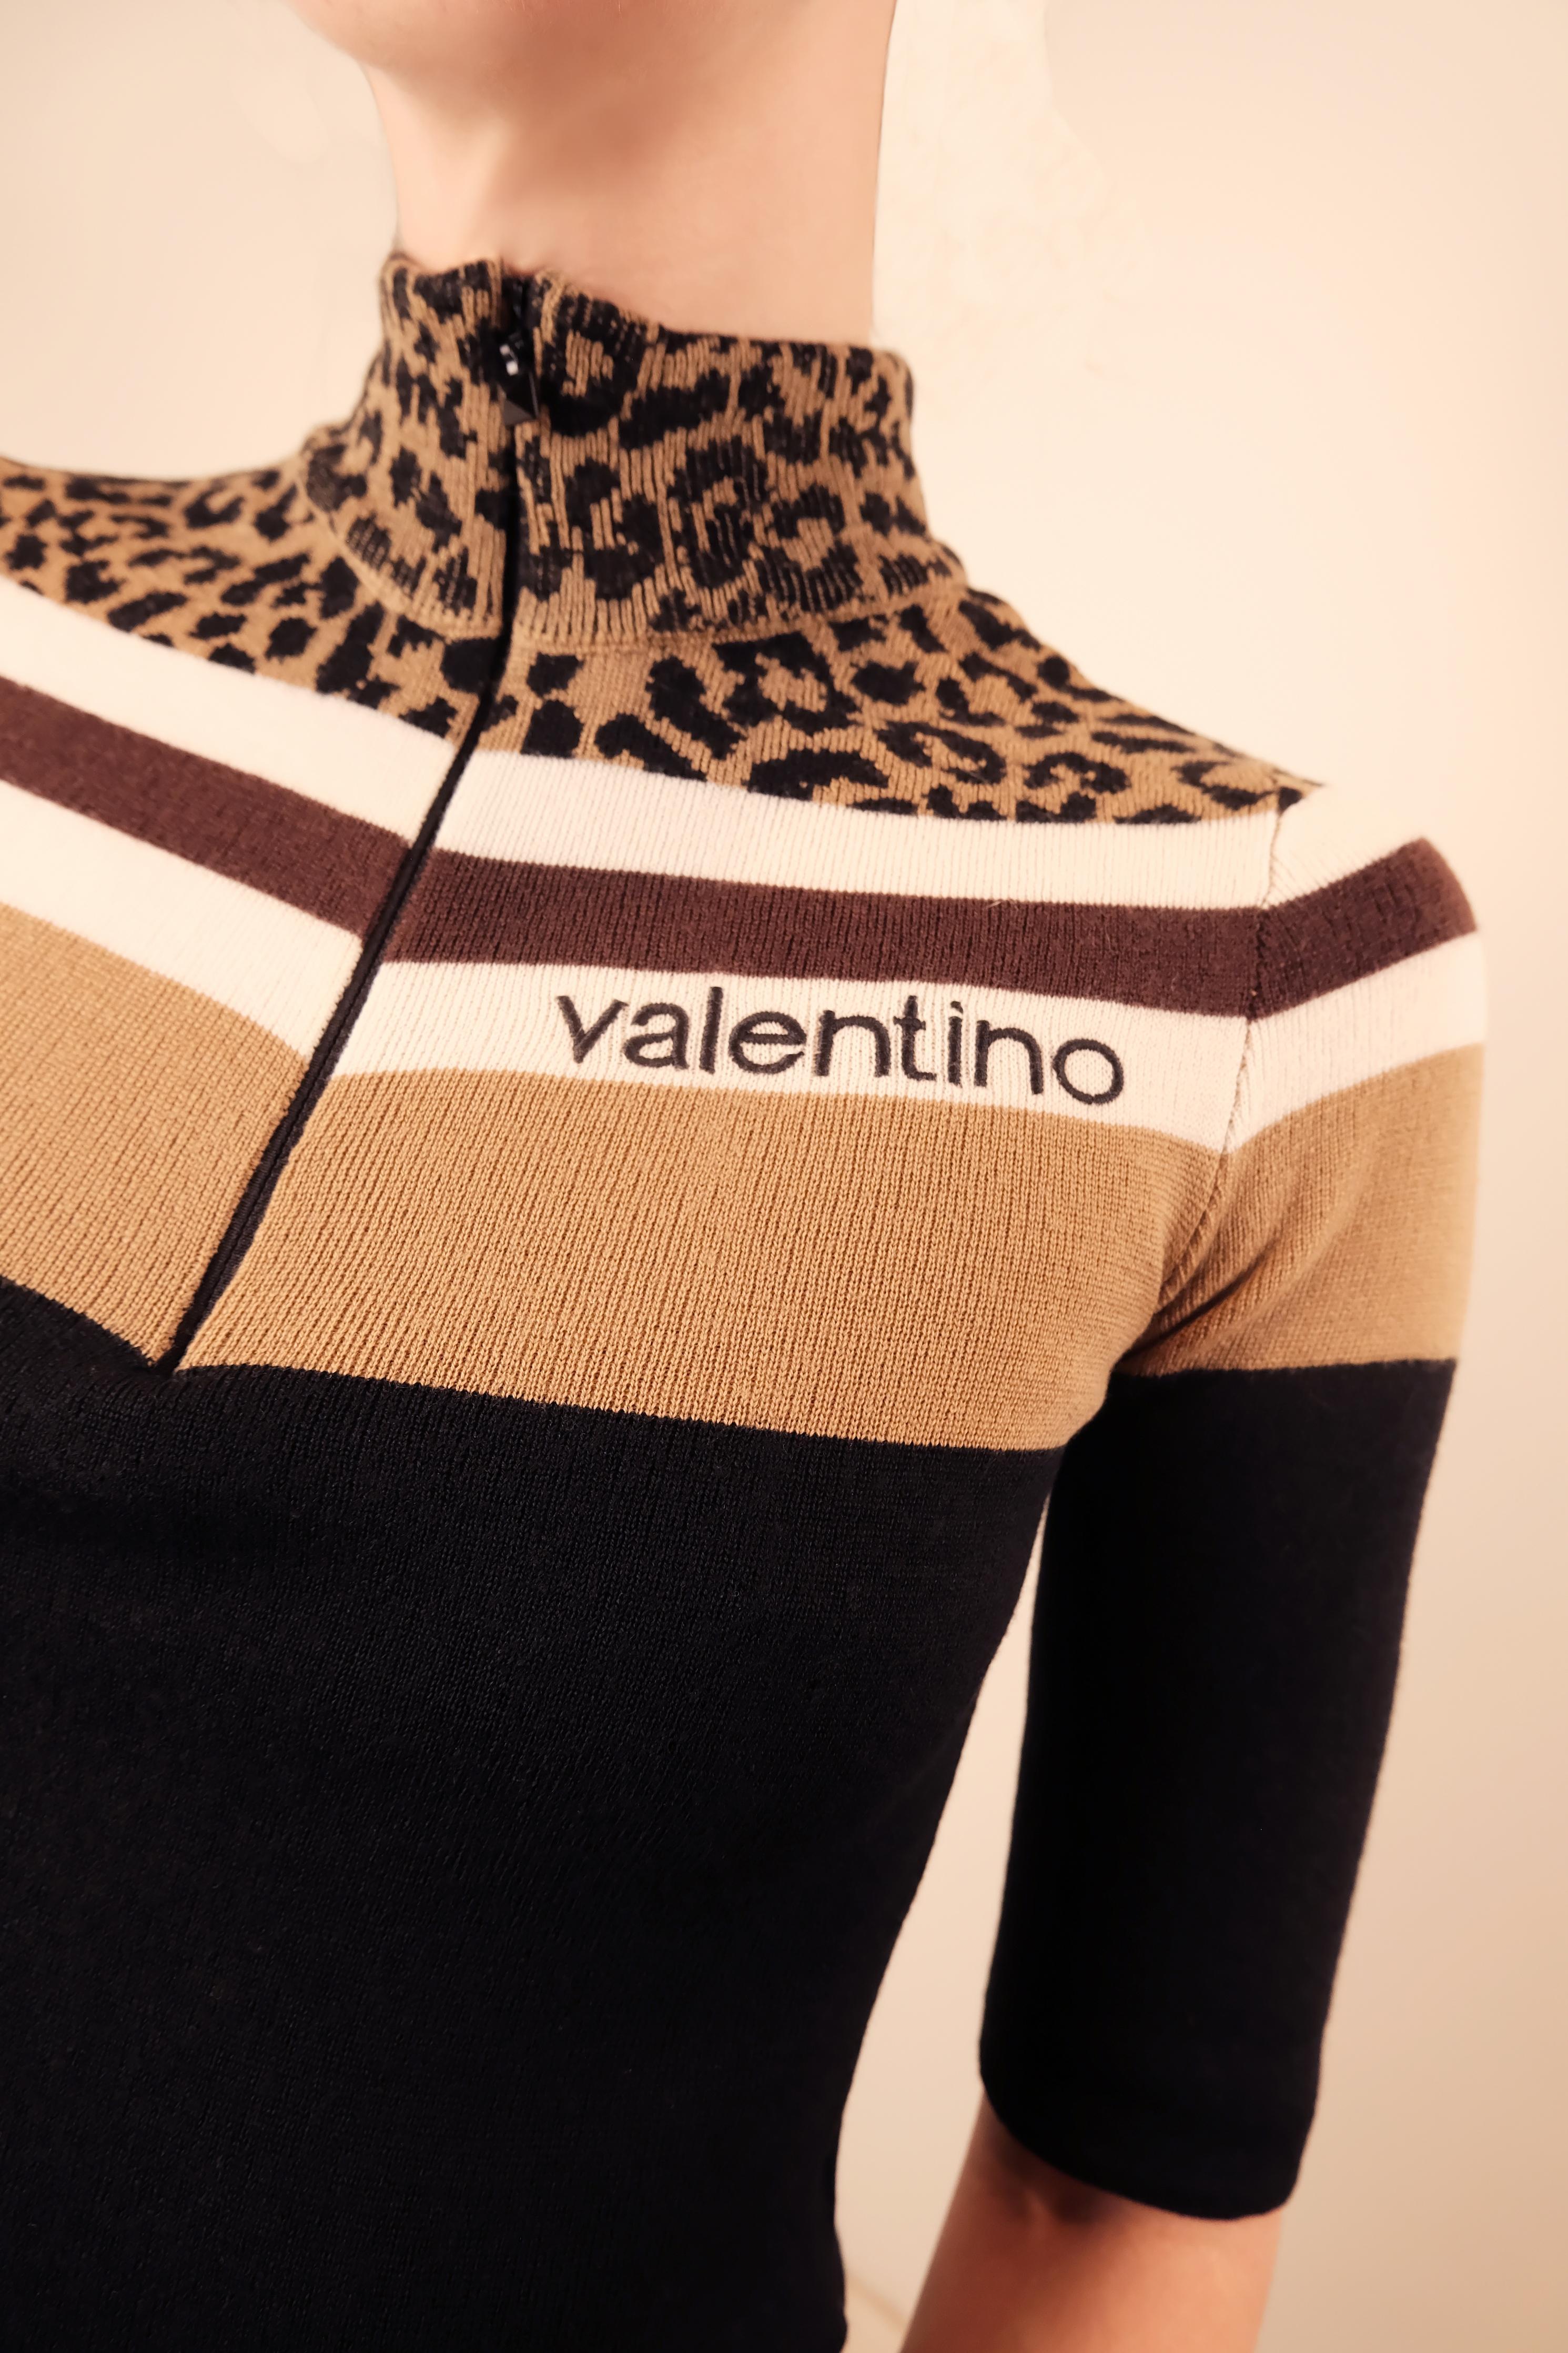 Women's VALENTINO Sporty Zip Up Short Sleeve Sweater Top For Sale